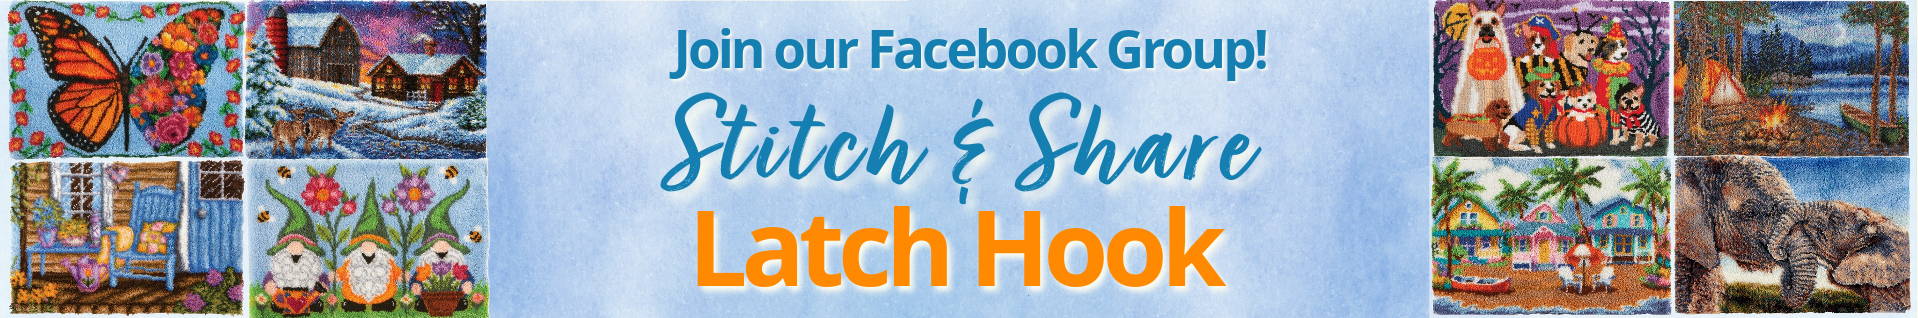 Join our Facebook Group! Stitch & Share Latch Hook.